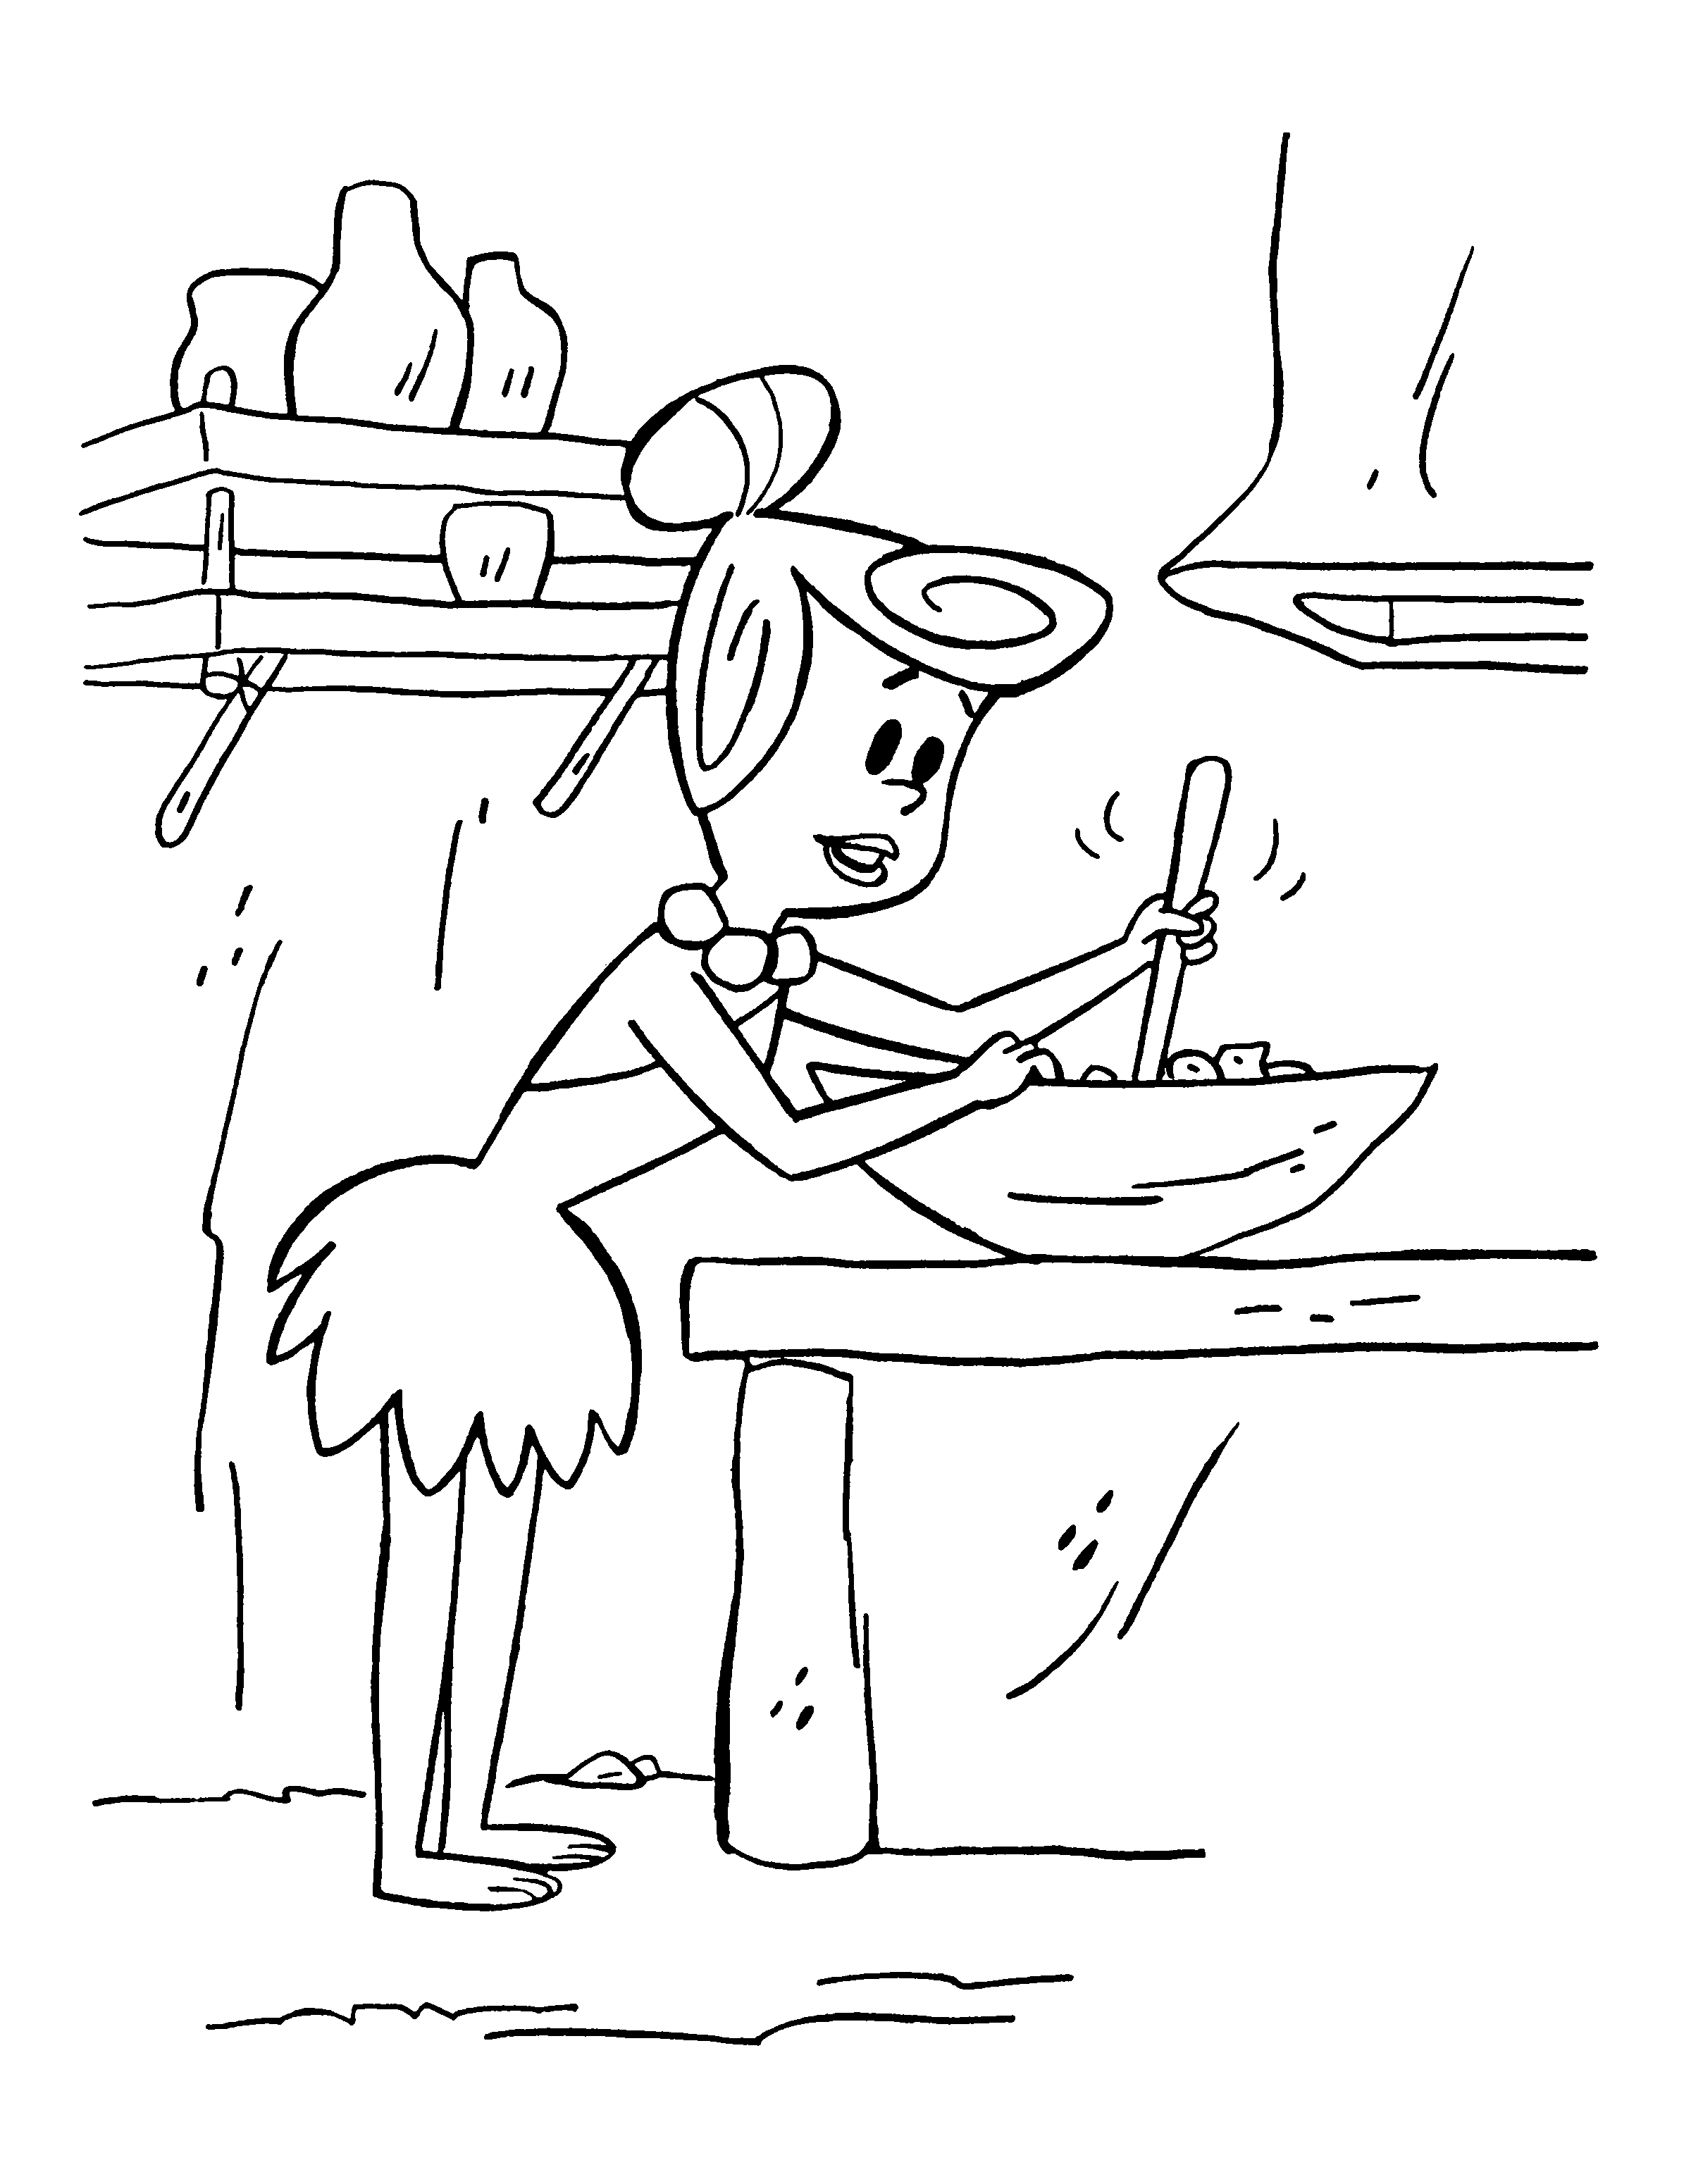 Wilma Cooking in The Kitchen Coloring Page | Ancient pages of ...